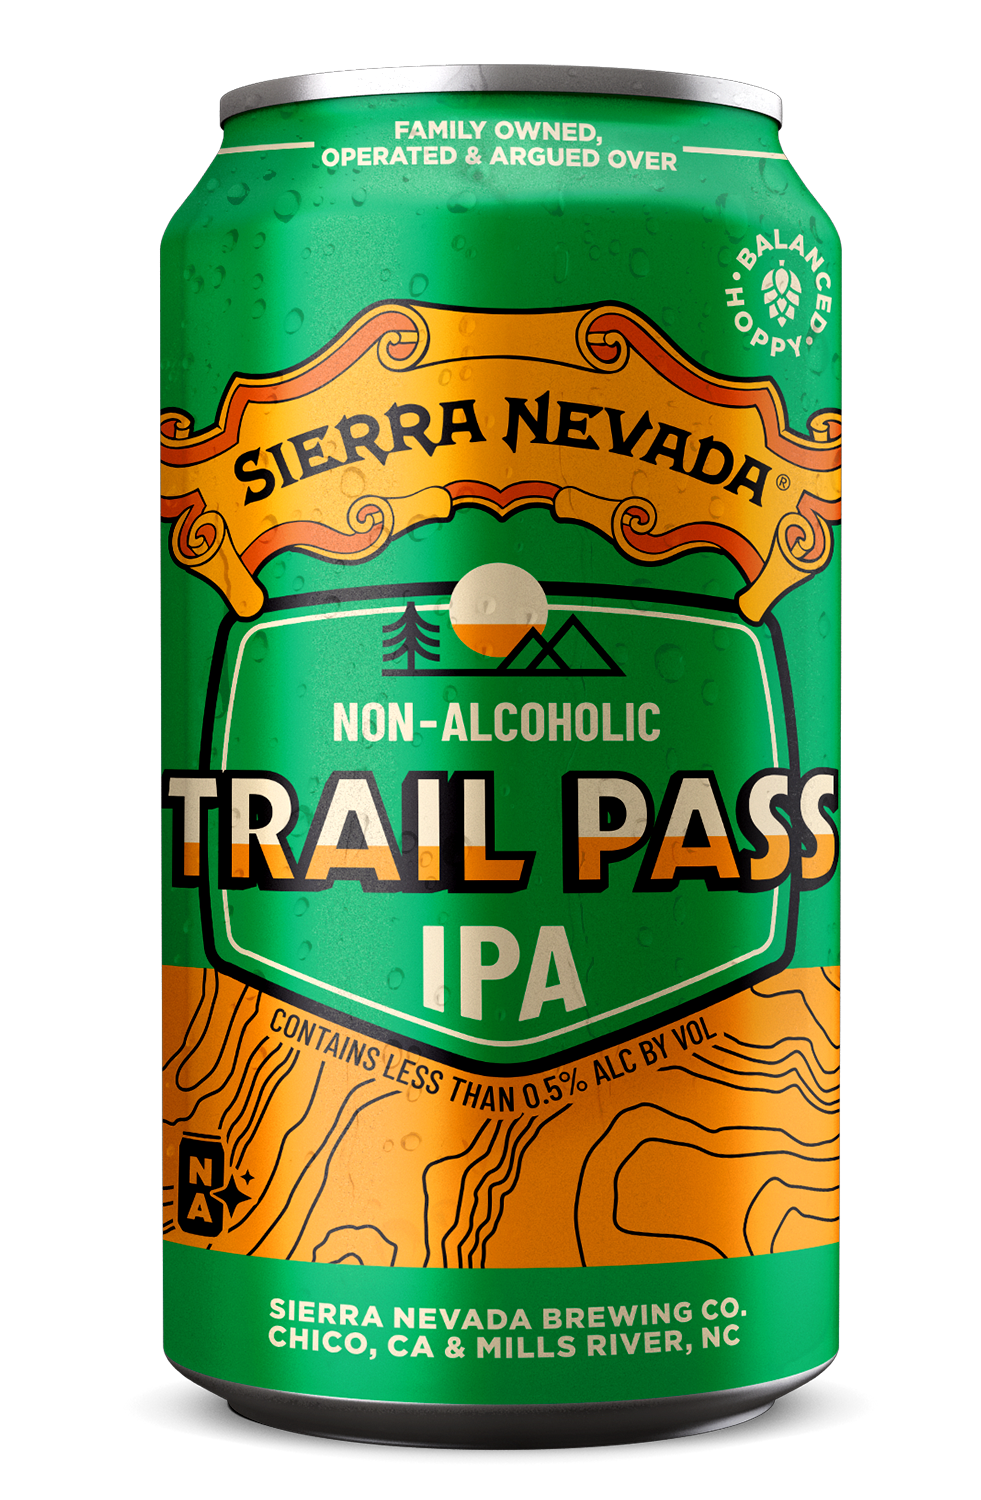 An individual can of Sierra Nevada non-alcoholic Trail Pass IPA brew